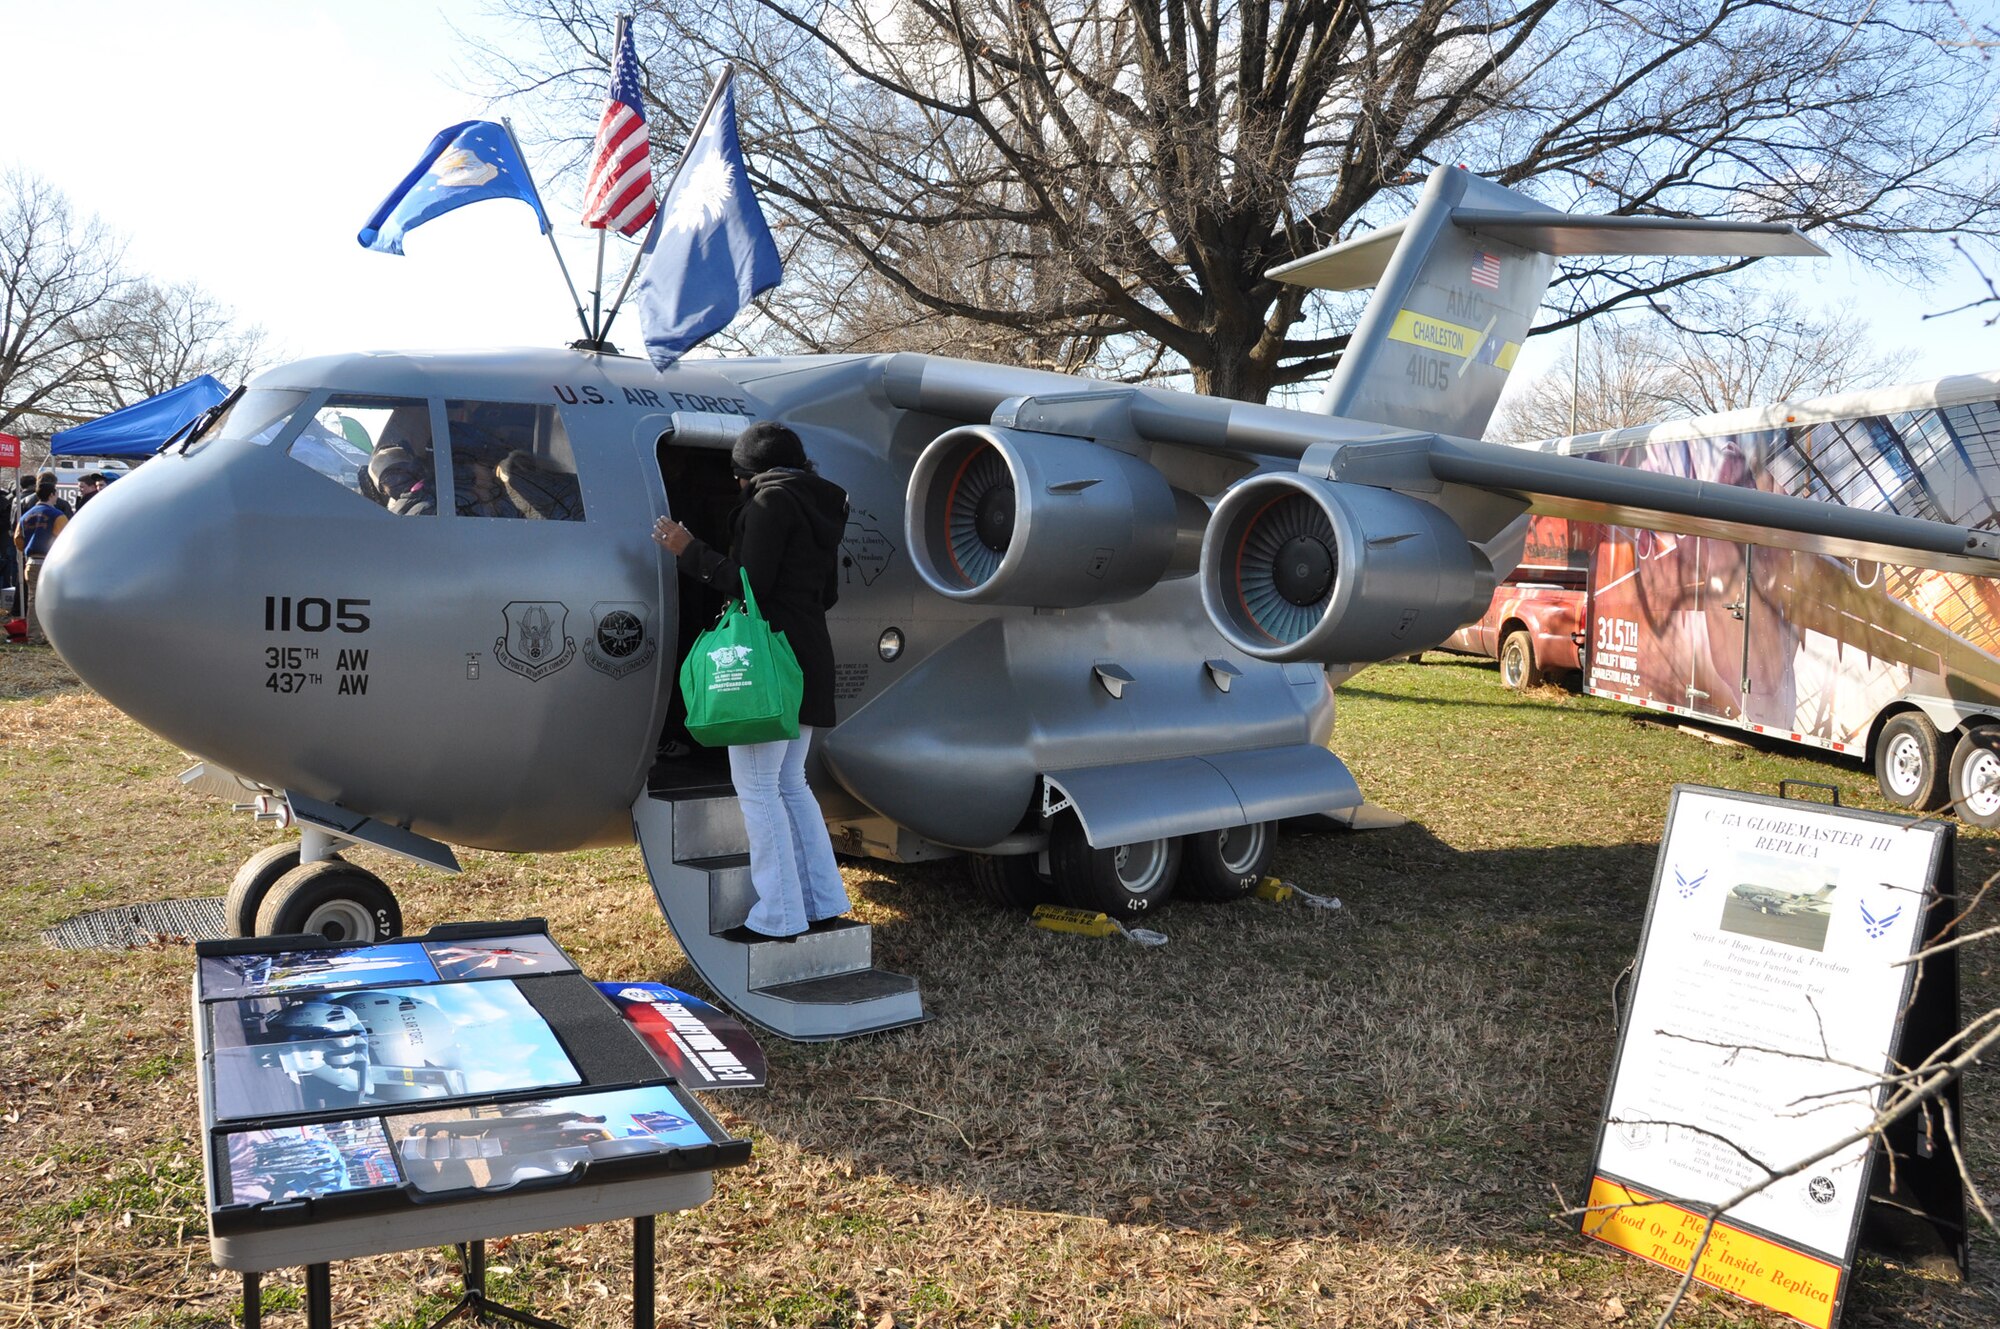 The mini C-17 and Reservists from the 315th Airlift Wing, Joint Base Charleston, S.C. showcase the miniature replica of a Boeing C-17 Globemaster III aircraft at the 2011 Military Bowl at Robert F. Kennedy Stadium Dec. 28, 2011 in Washington, D.C. (U.S. Air Force photo/Senior Airman Bobby Pilch)